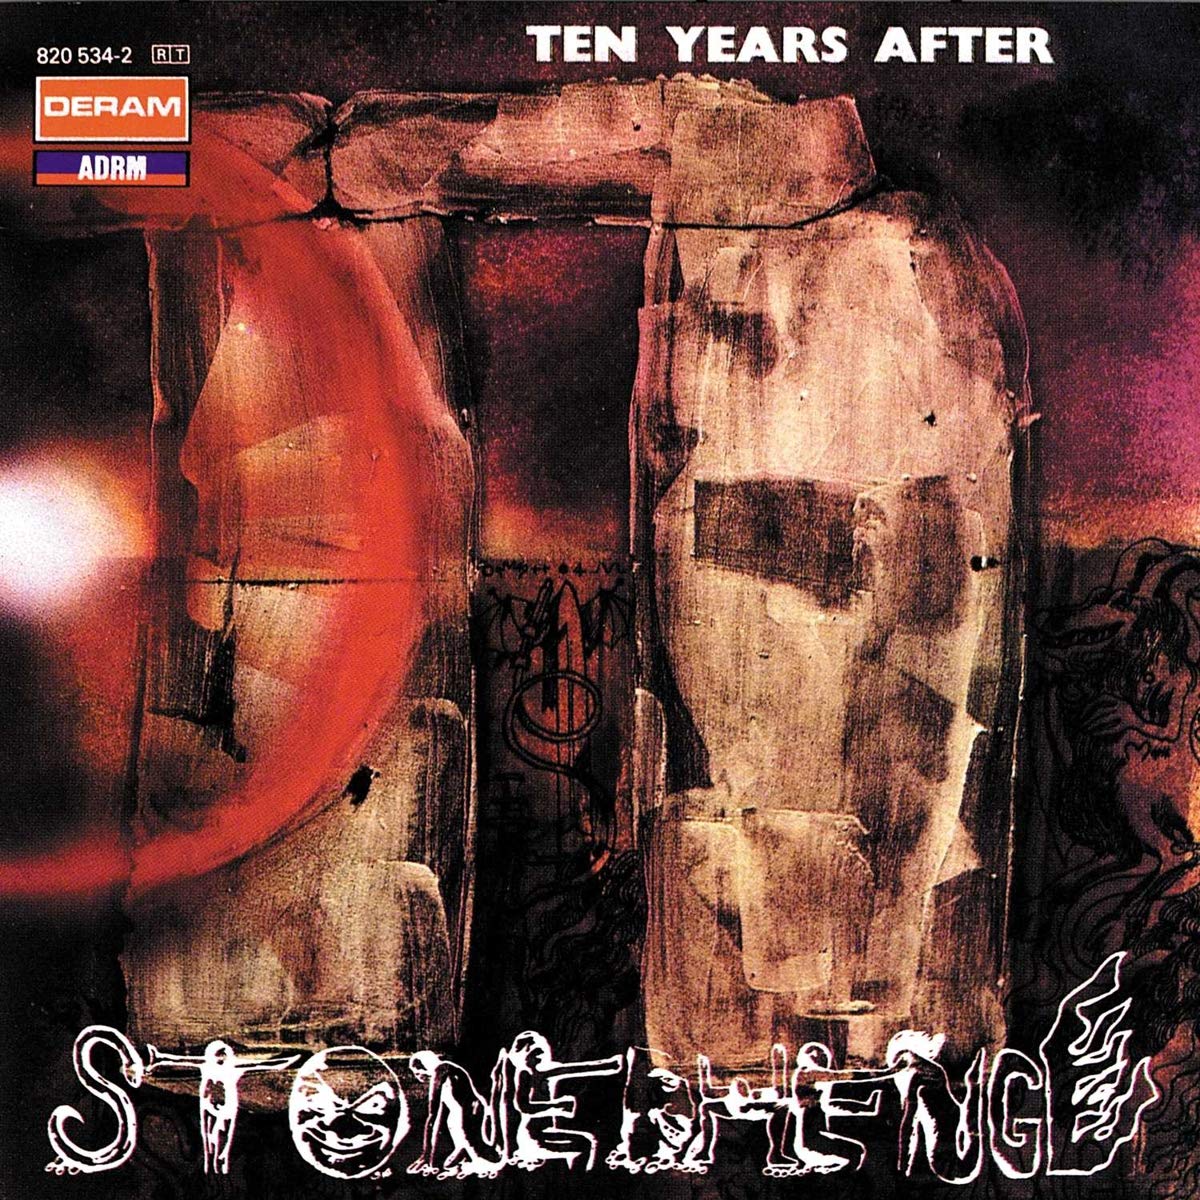 Ten Years After - Stonedhenge, 1969

A psychedelic blues album, it expands the group's boogie rock sound into more experimental territory. Features seven songs written by Alvin Lee, along with a song each from  Leo Lyons, Chick Churchill and Ric Lee.
#TenYearsAfter